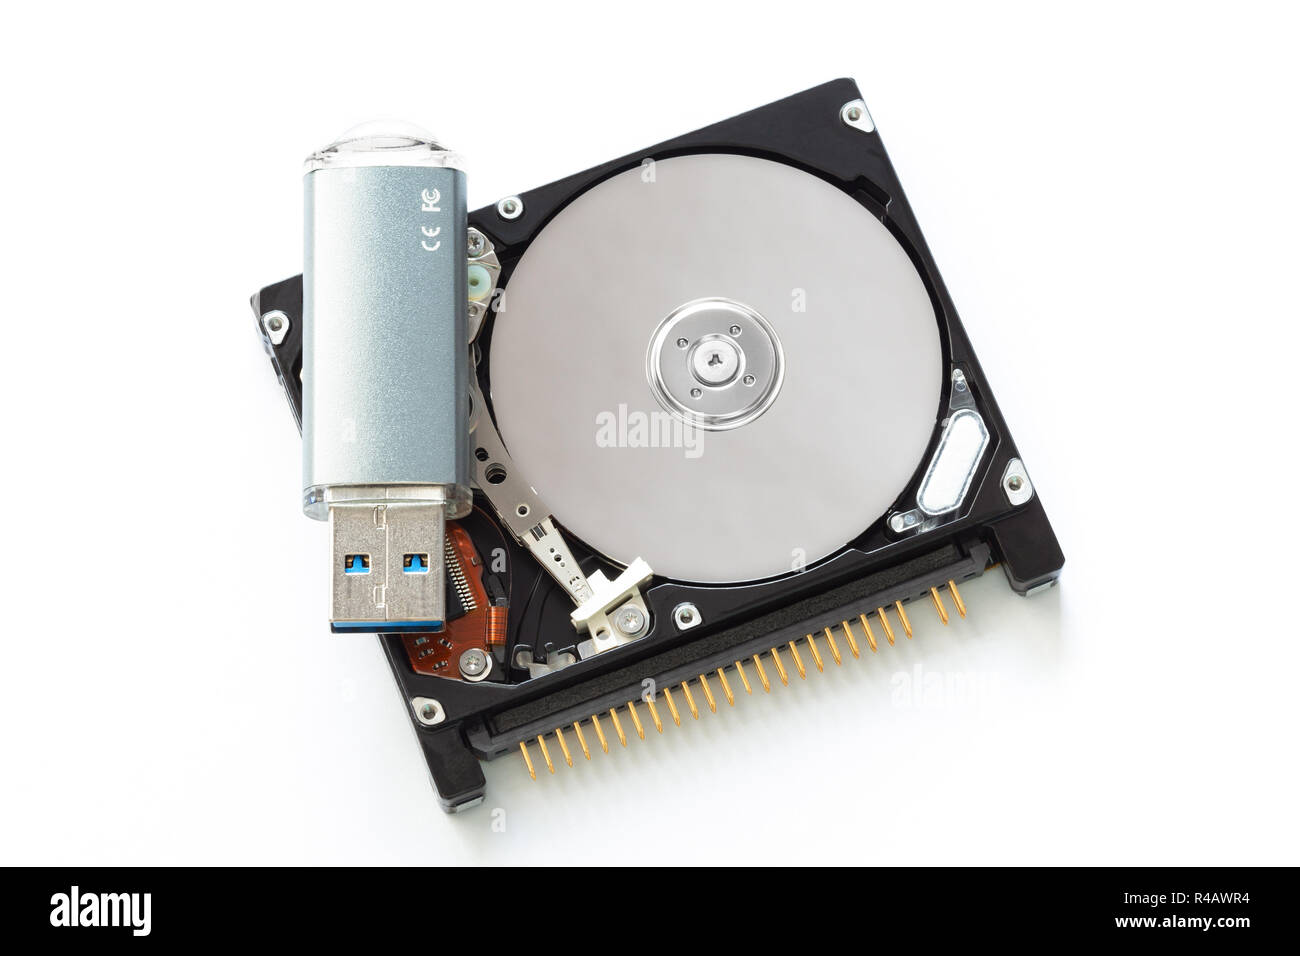 Hard drive 1.8' and flash drive on a white background. Compare sizes. Stock Photo